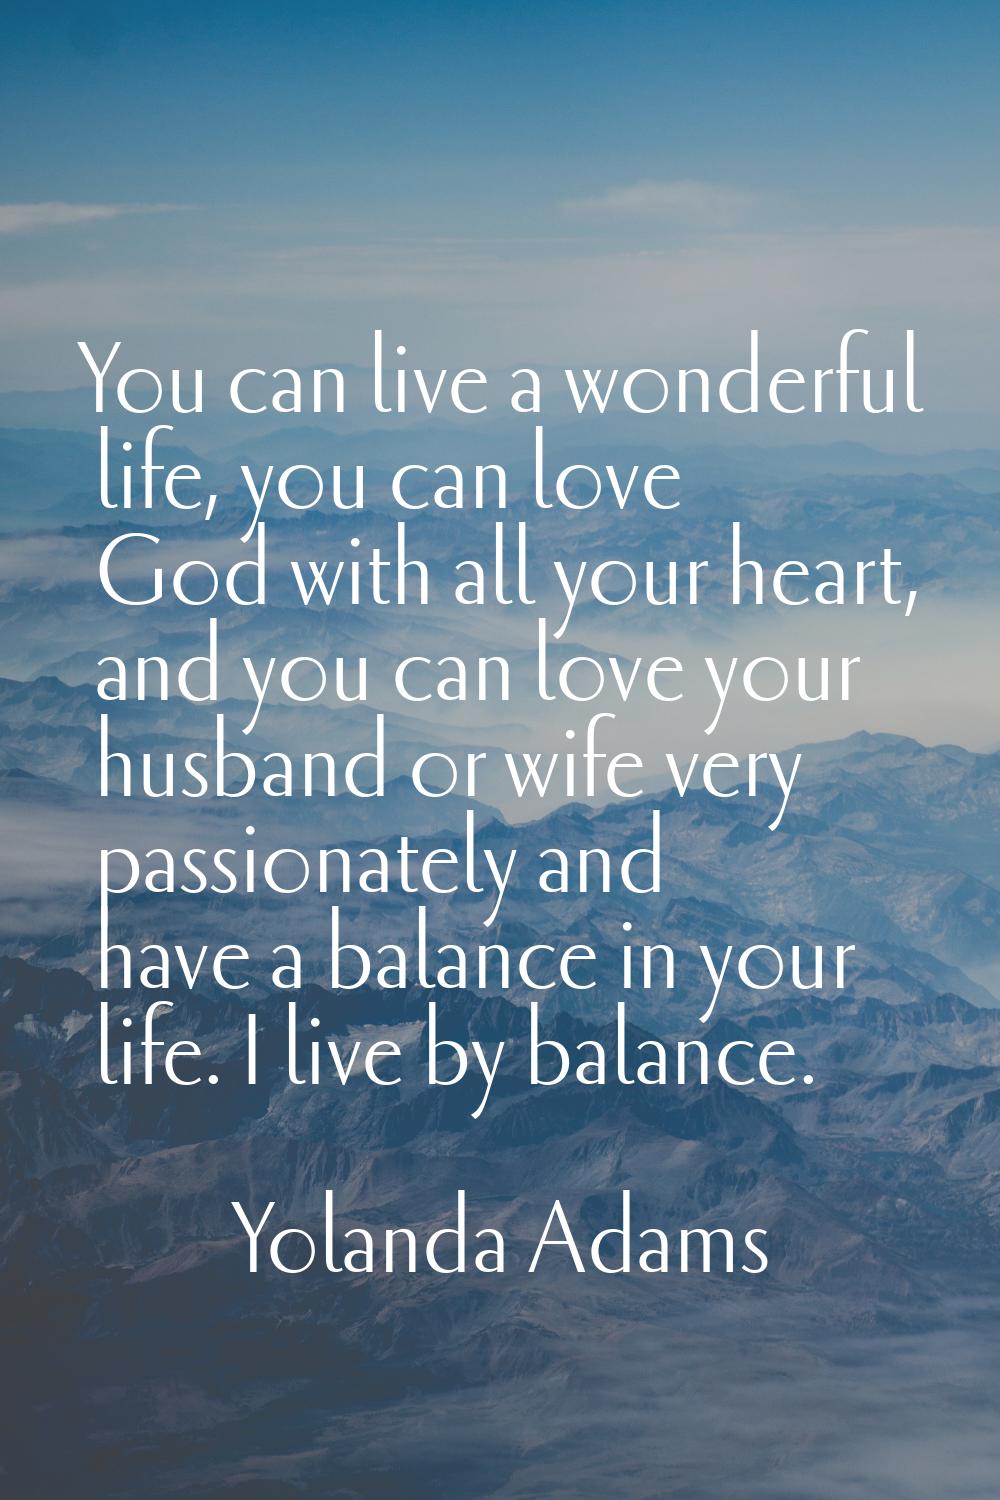 You can live a wonderful life, you can love God with all your heart, and you can love your husband 